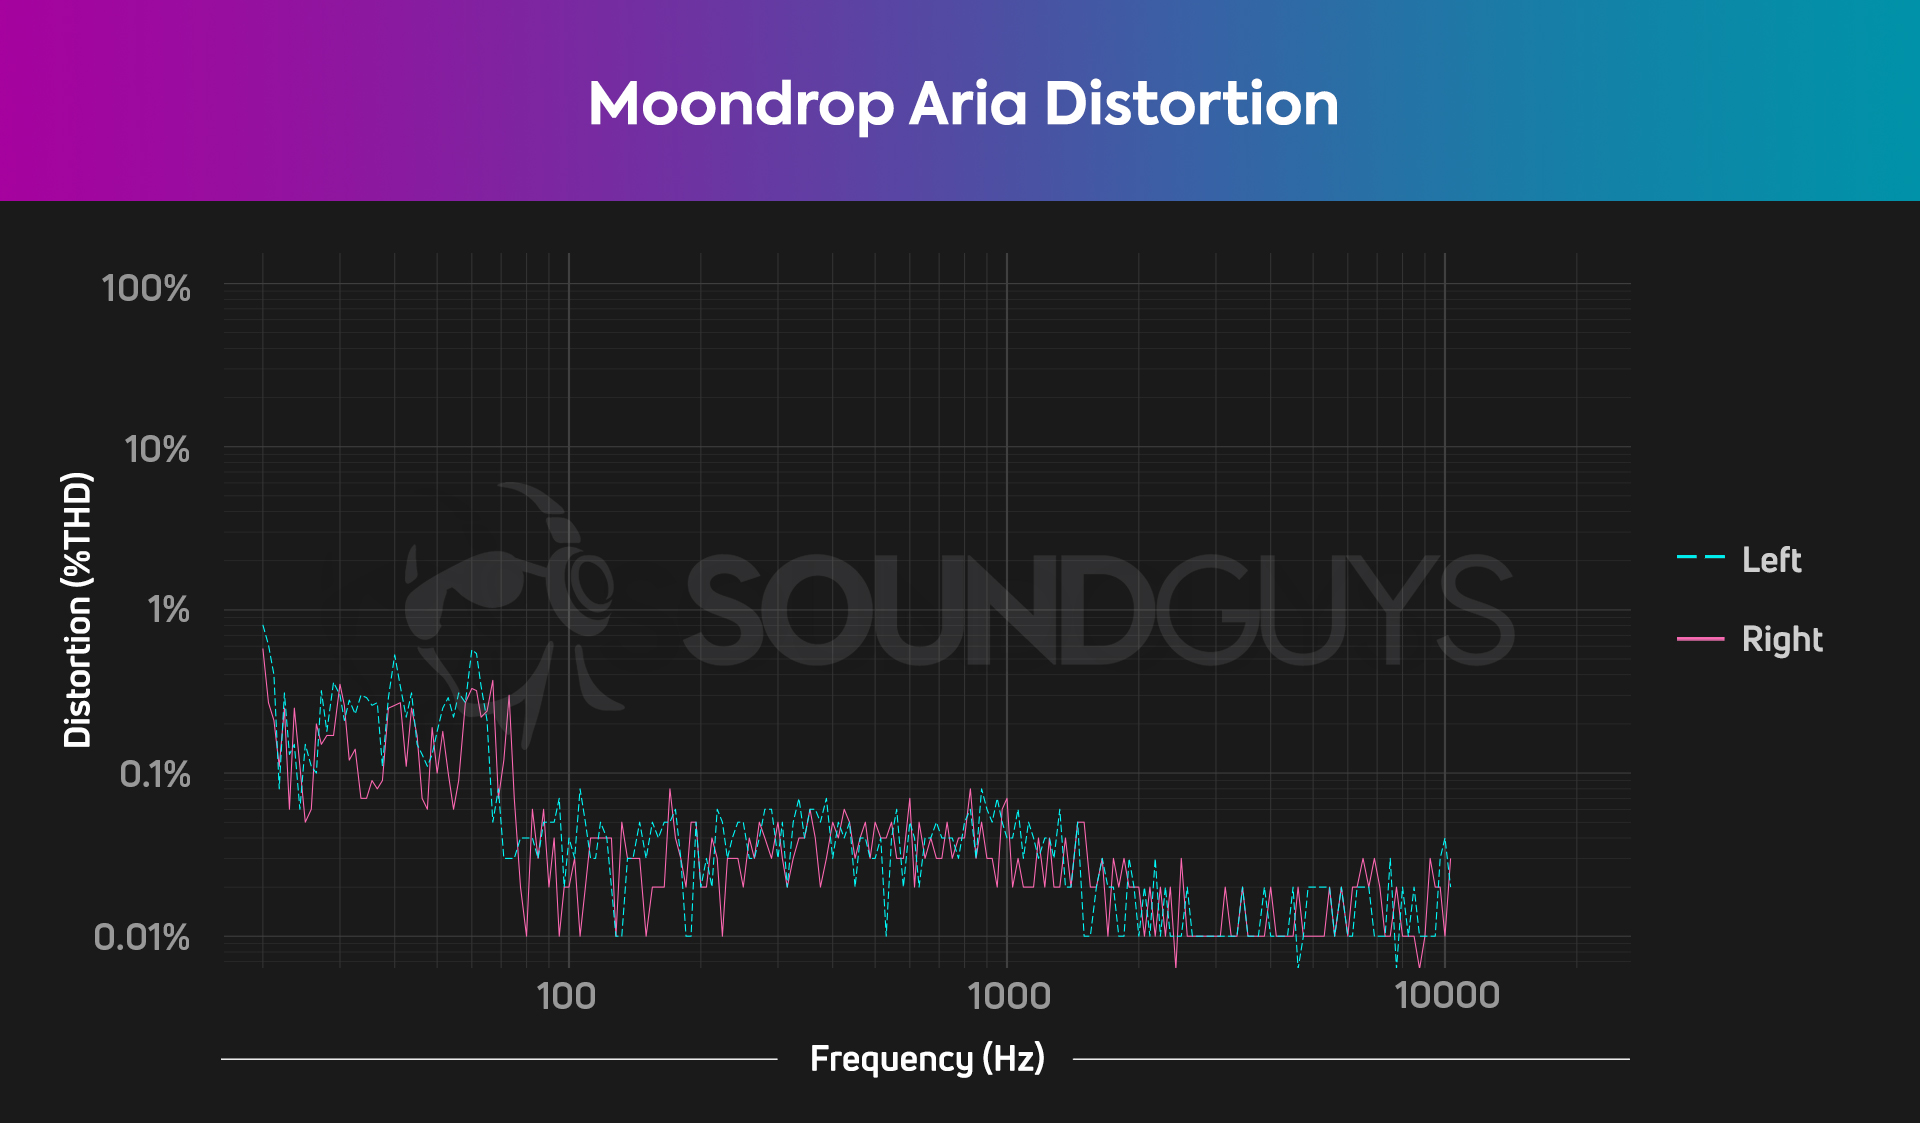 The Moondrop Aria (THD) distortion performance charted.